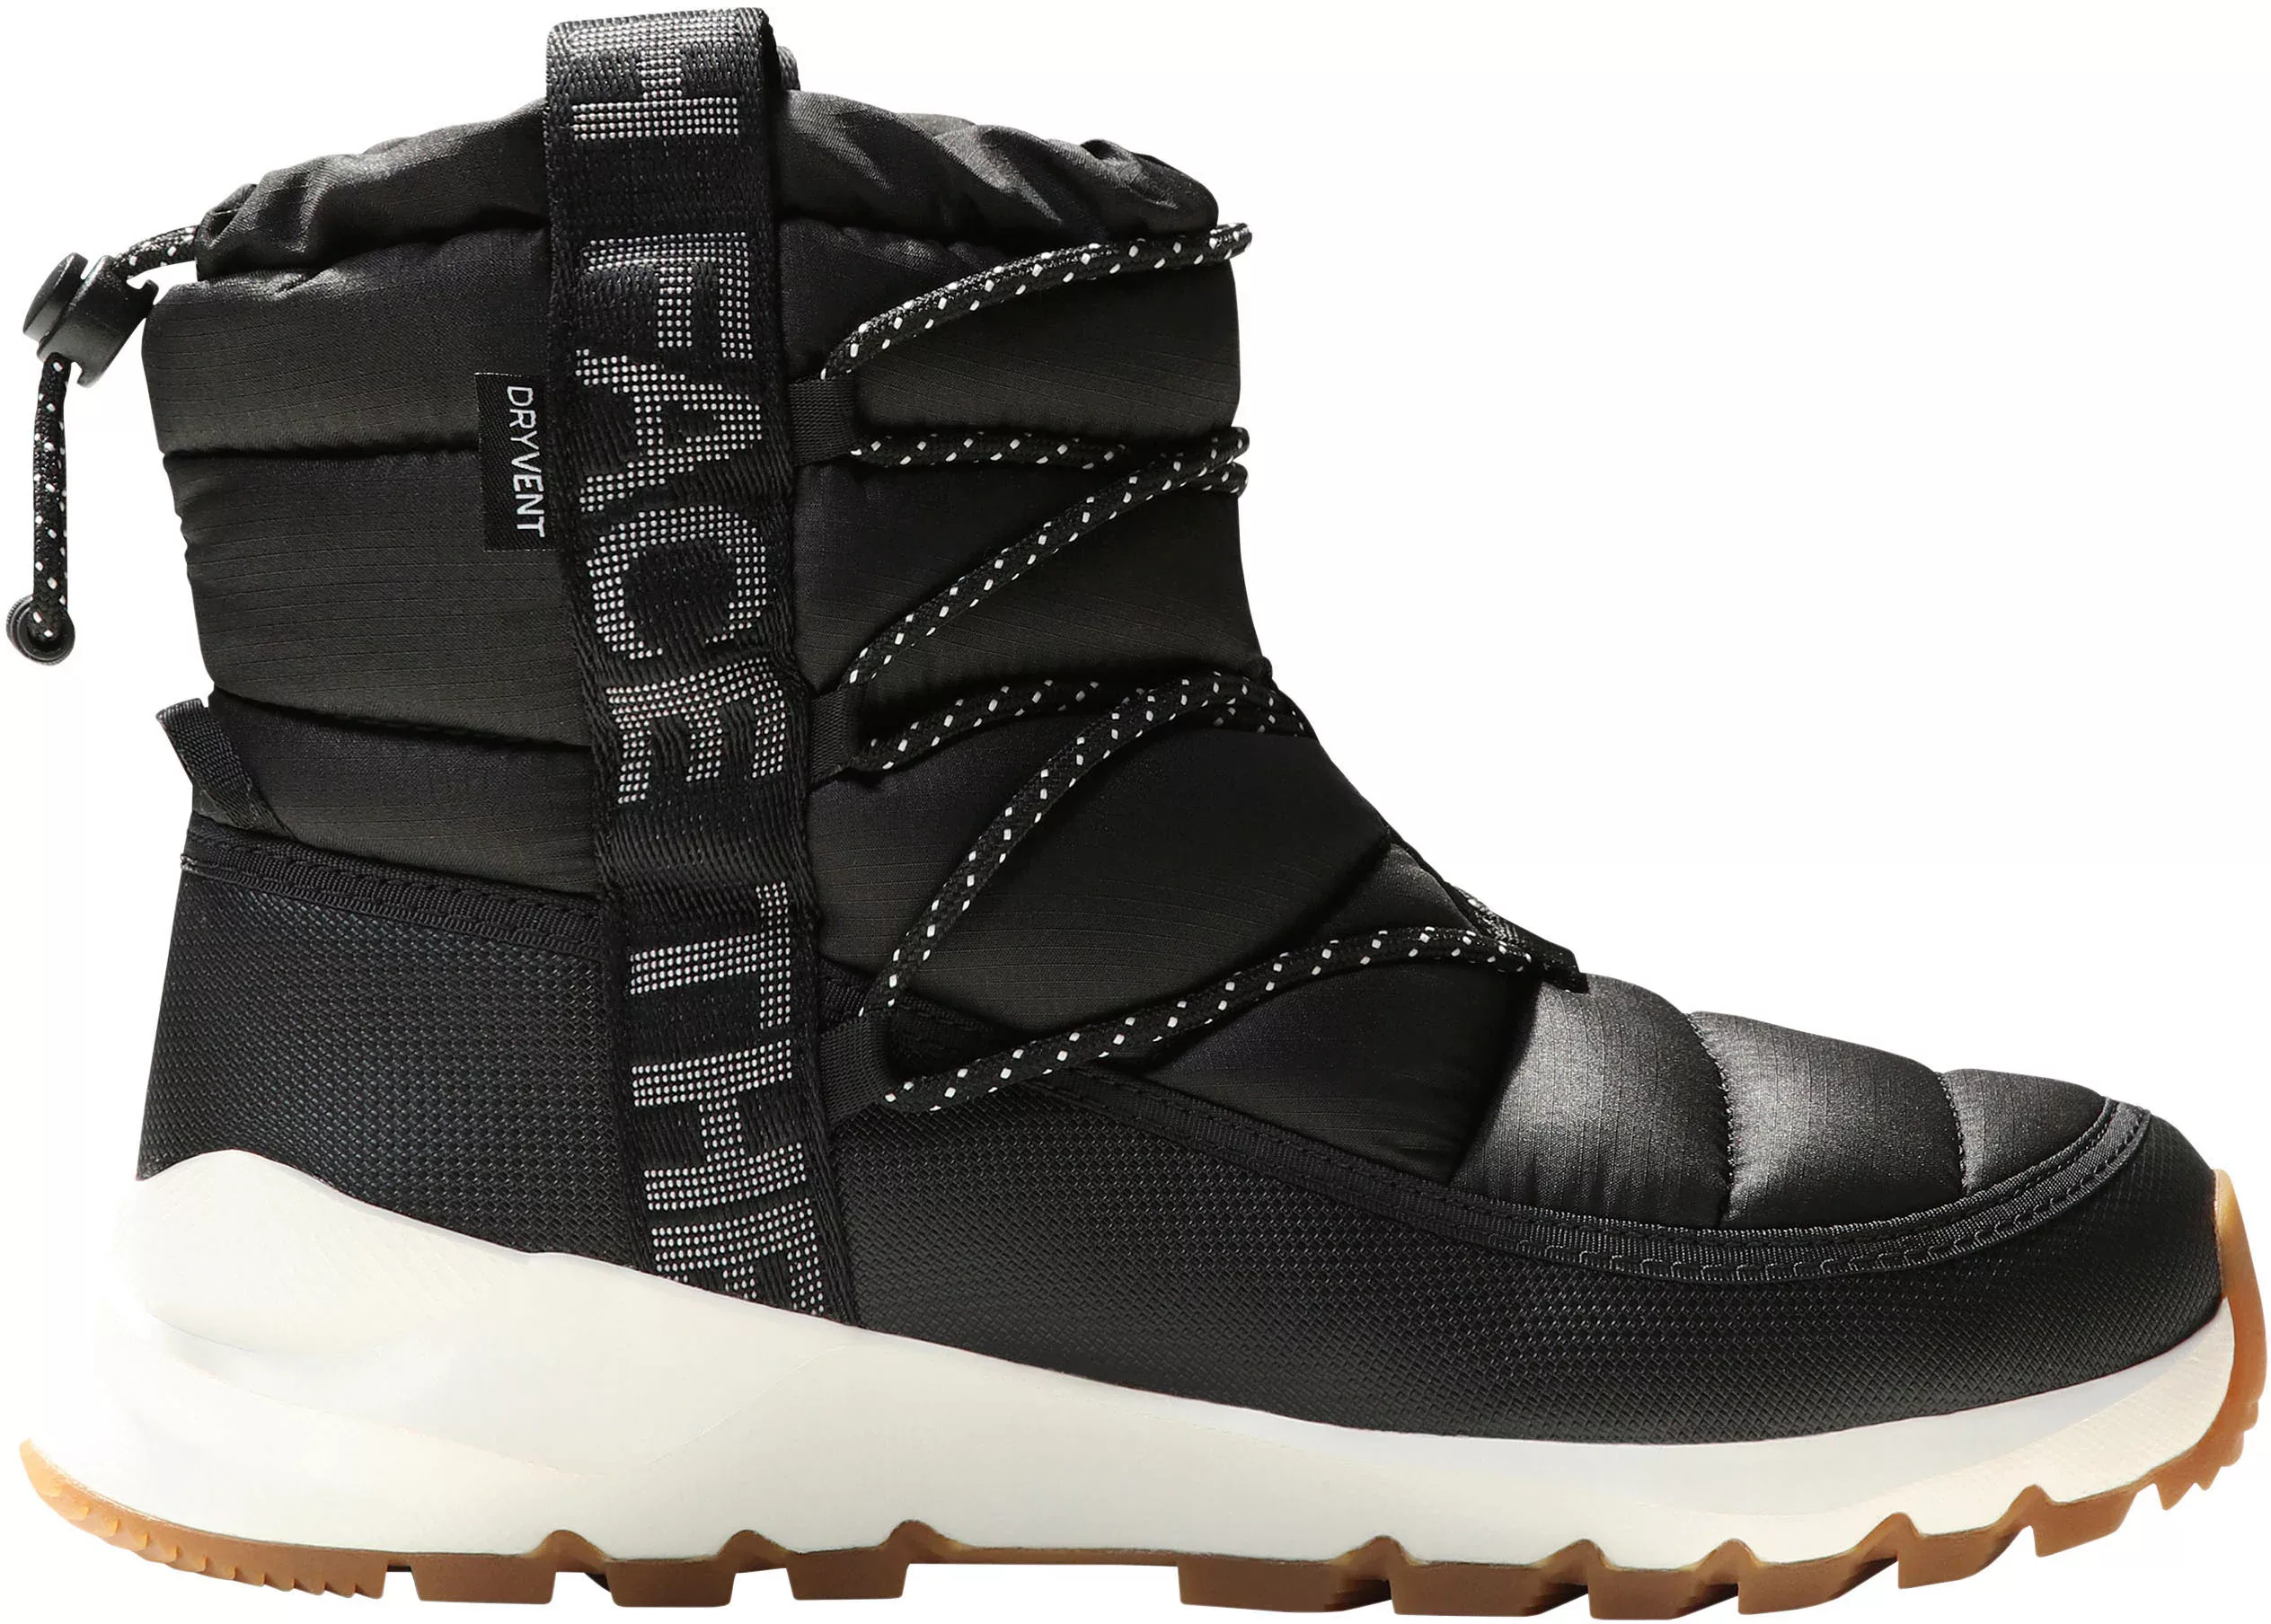 The North Face Winterstiefel "W THERMOBALL LACE UP WP" günstig online kaufen